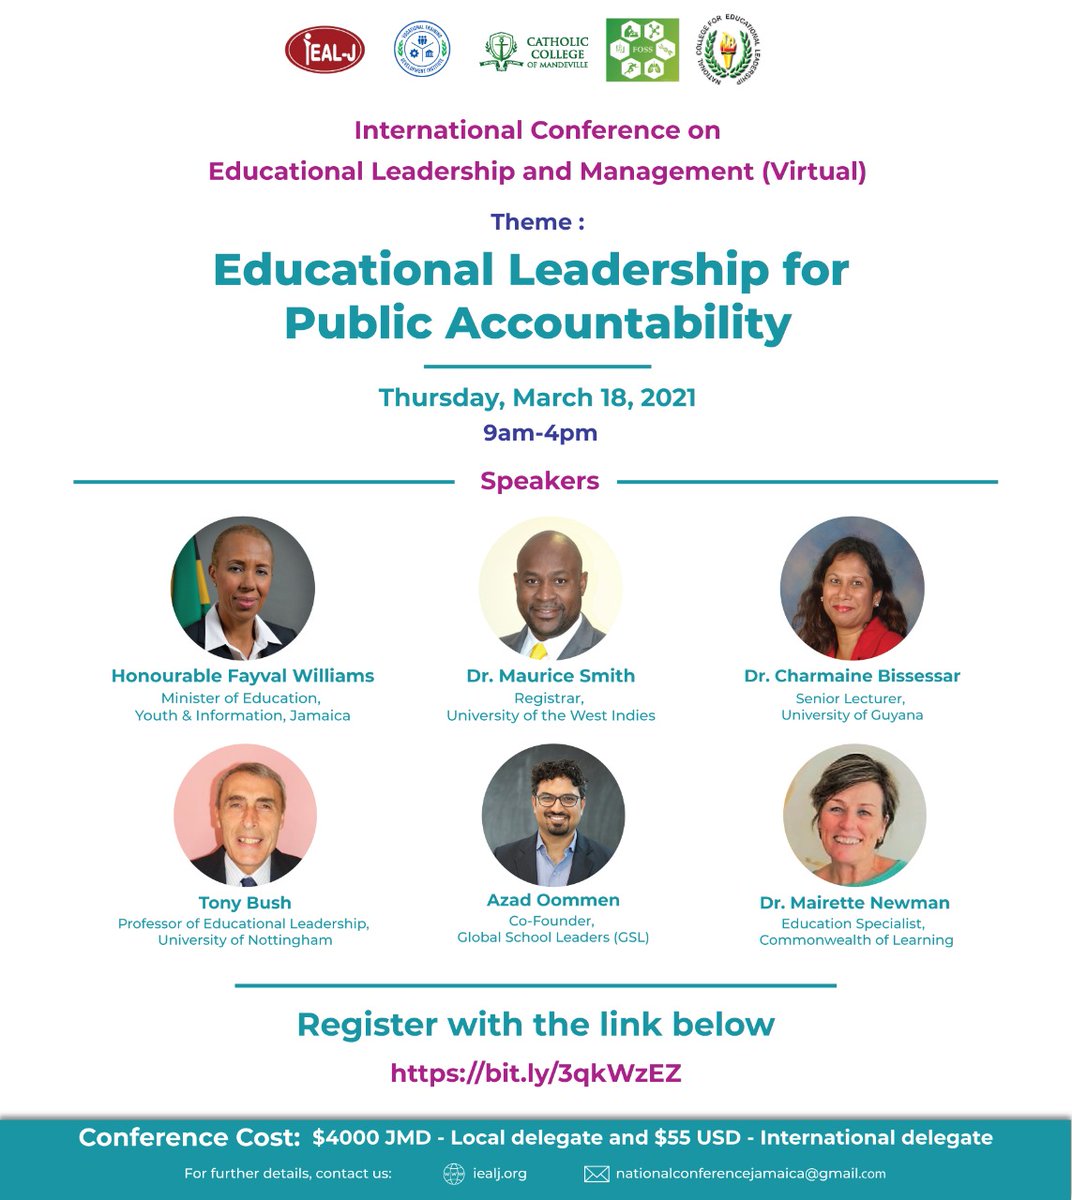 Registration for ICELM 2021 is now open! Click the link to register: bit.ly/3qkWzEZ @asabiendasf @UCEA @BelmasOffice @CCEAMmembers @ojukomiller @CarmelRoofe @UTechJamaica @DrMoniByrne #Leadership #Management #Accountability #ICELM21